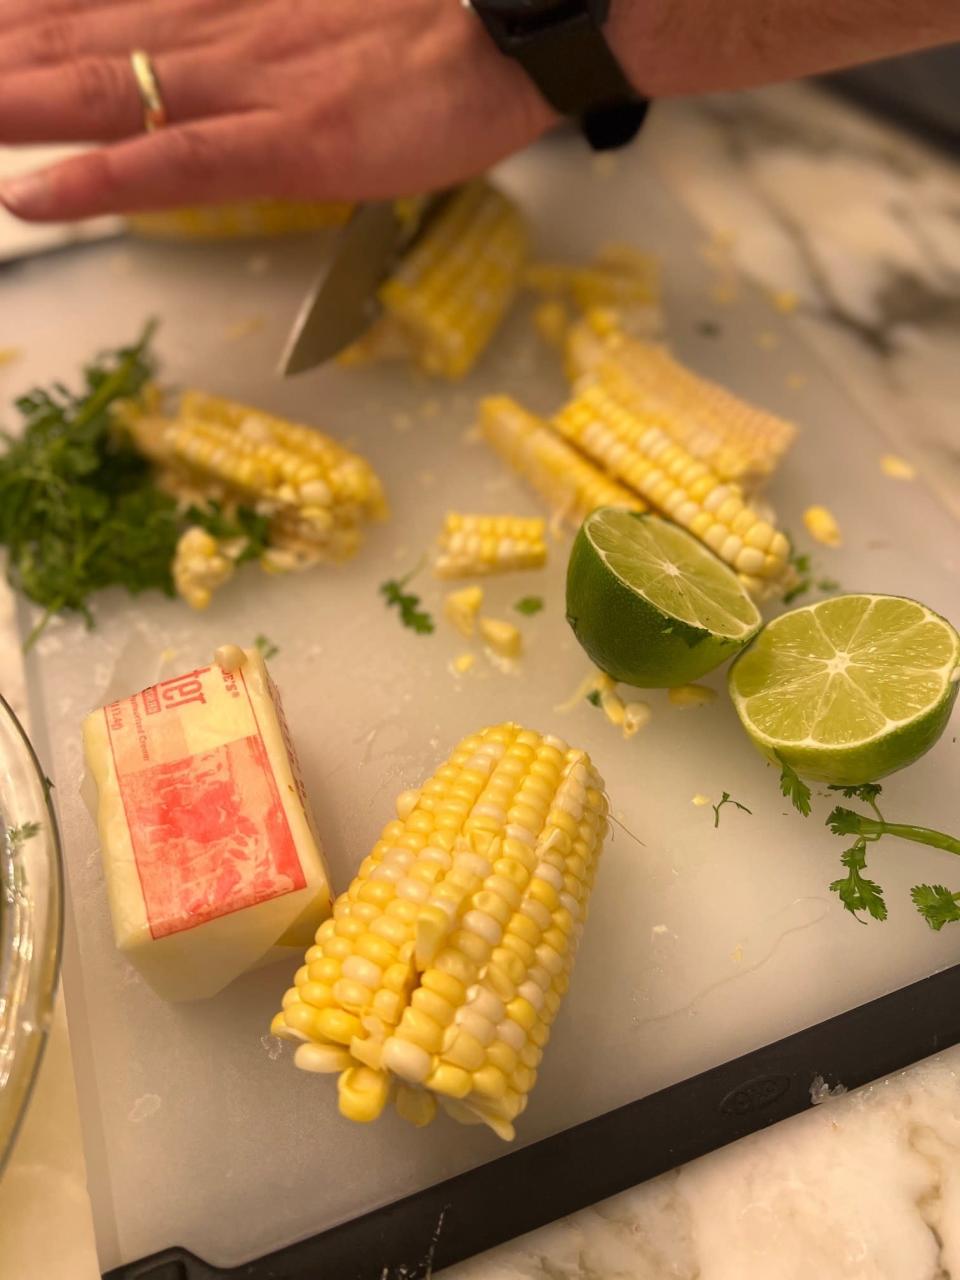 Corn and butter on a cutting board